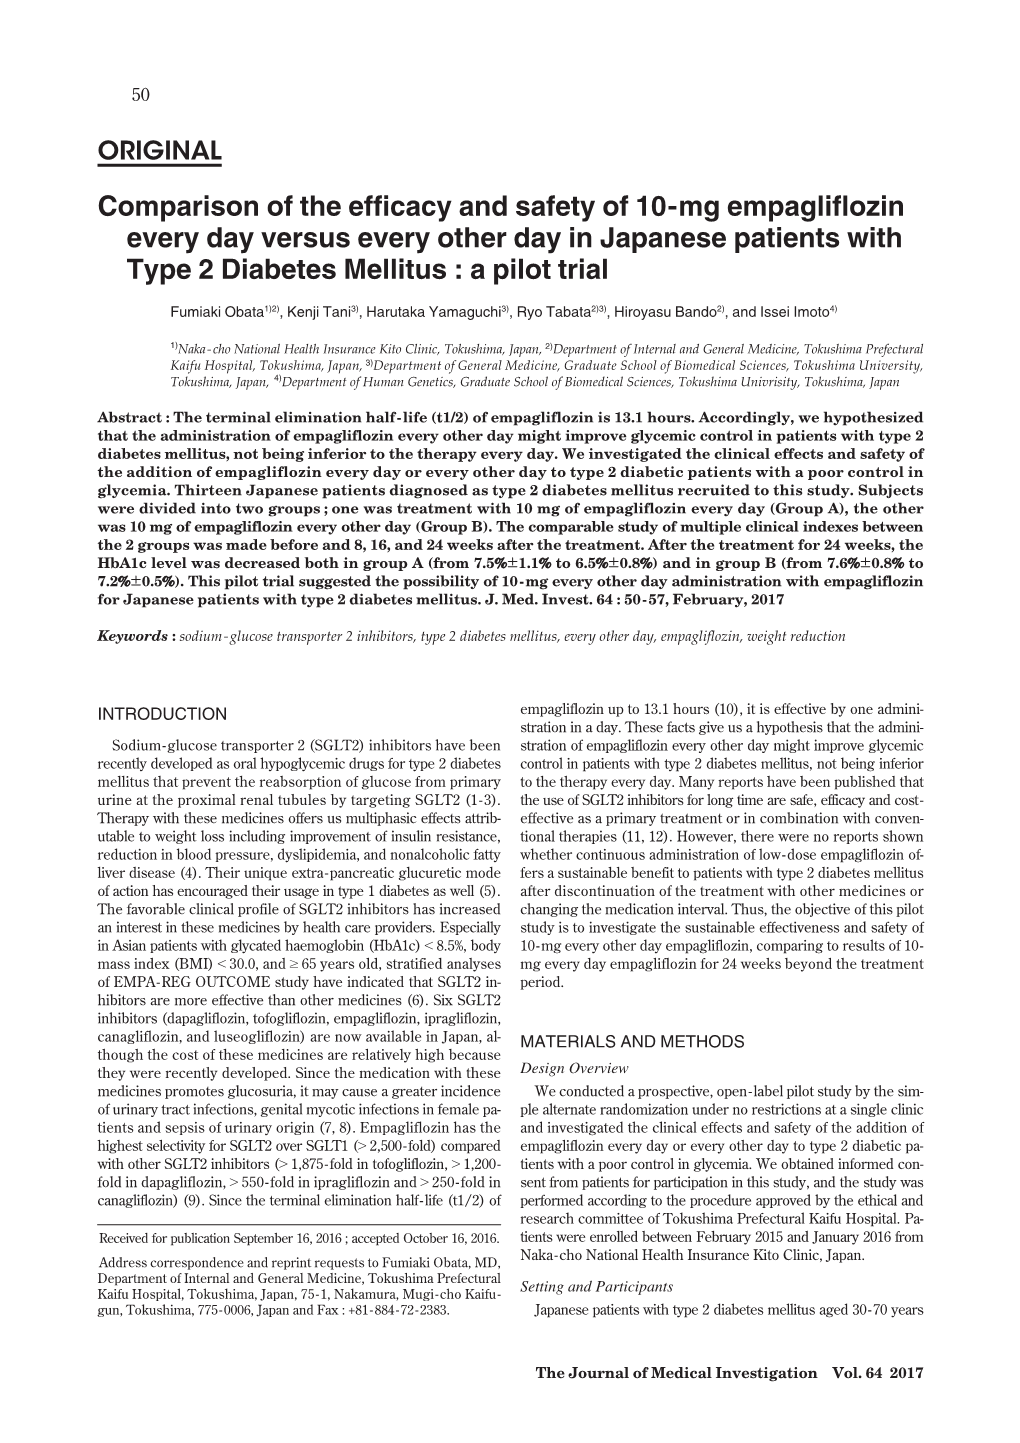 Comparison of the Efficacy and Safety of 10-Mg Empagliflozin Every Day Versus Every Other Day in Japanese Patients with Type 2 Diabetes Mellitus : a Pilot Trial